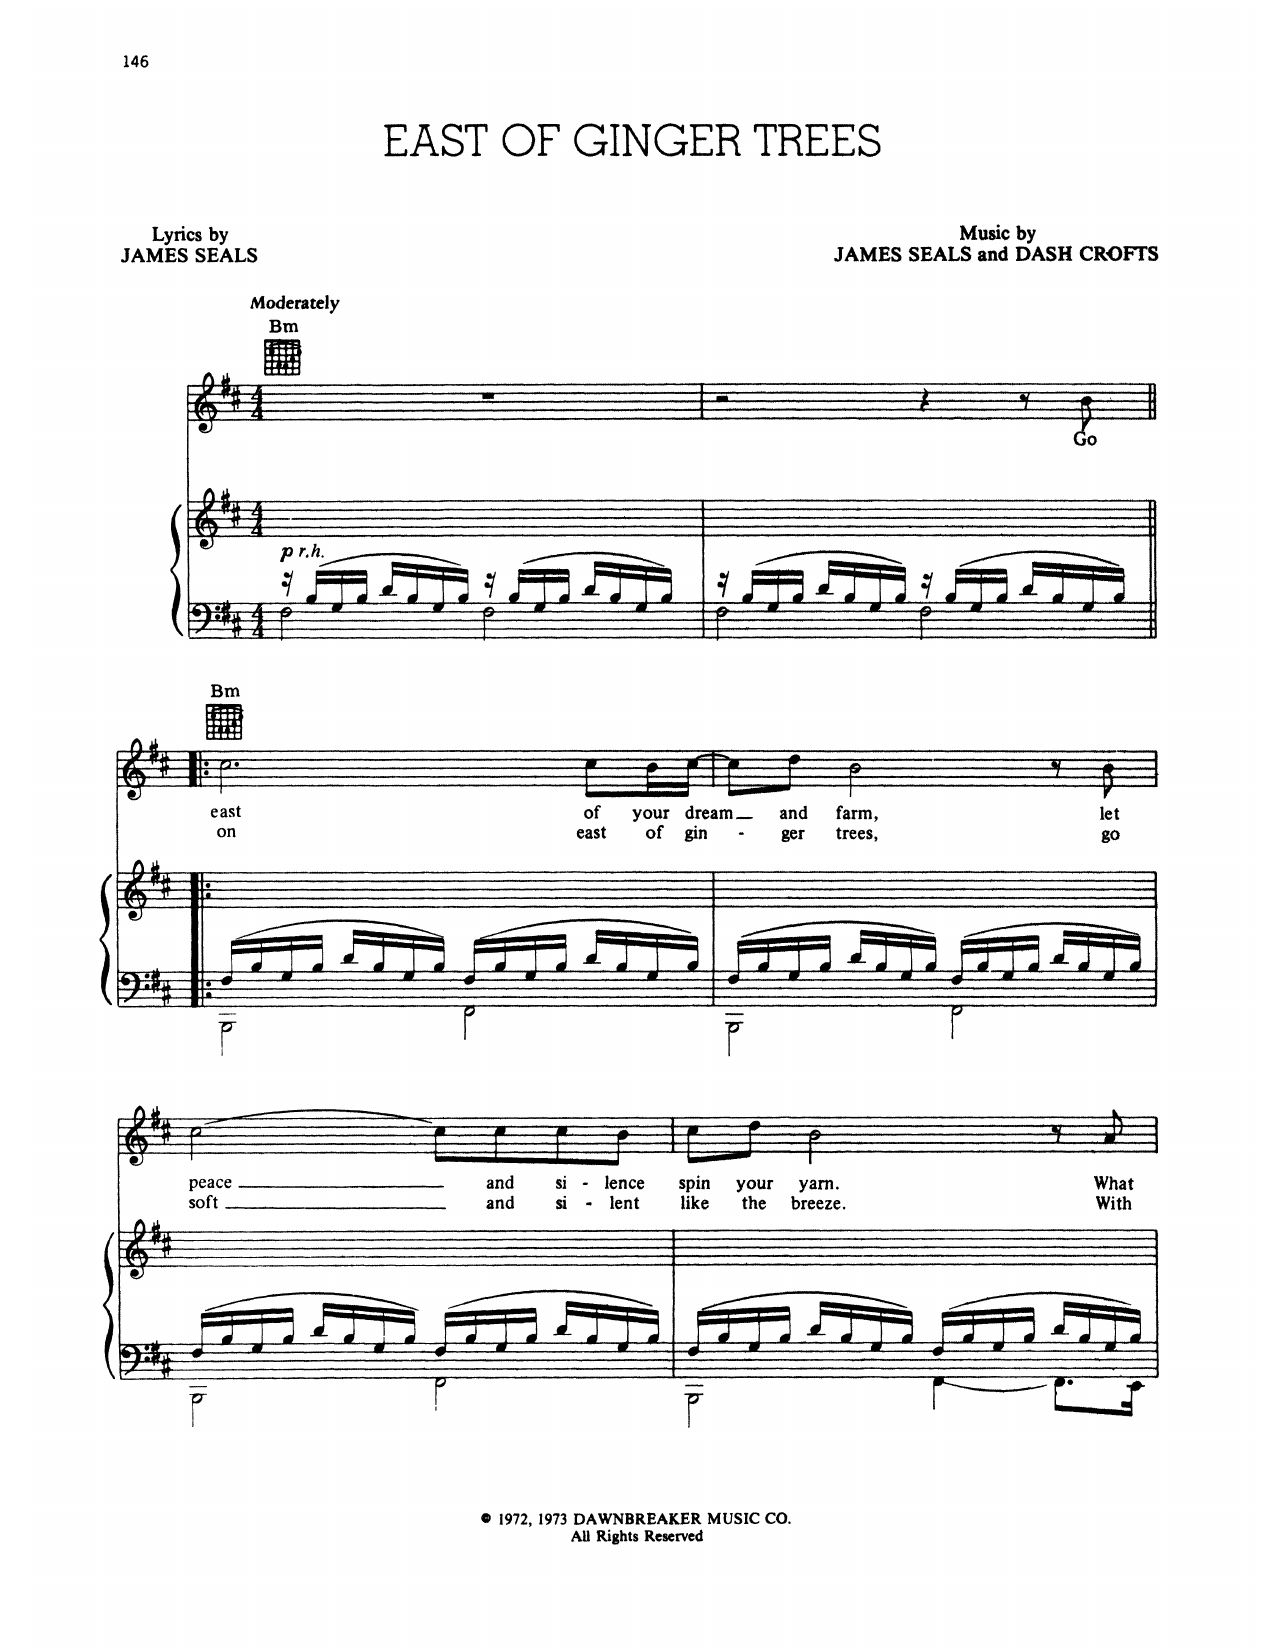 Download Seals and Crofts East Of Ginger Trees Sheet Music